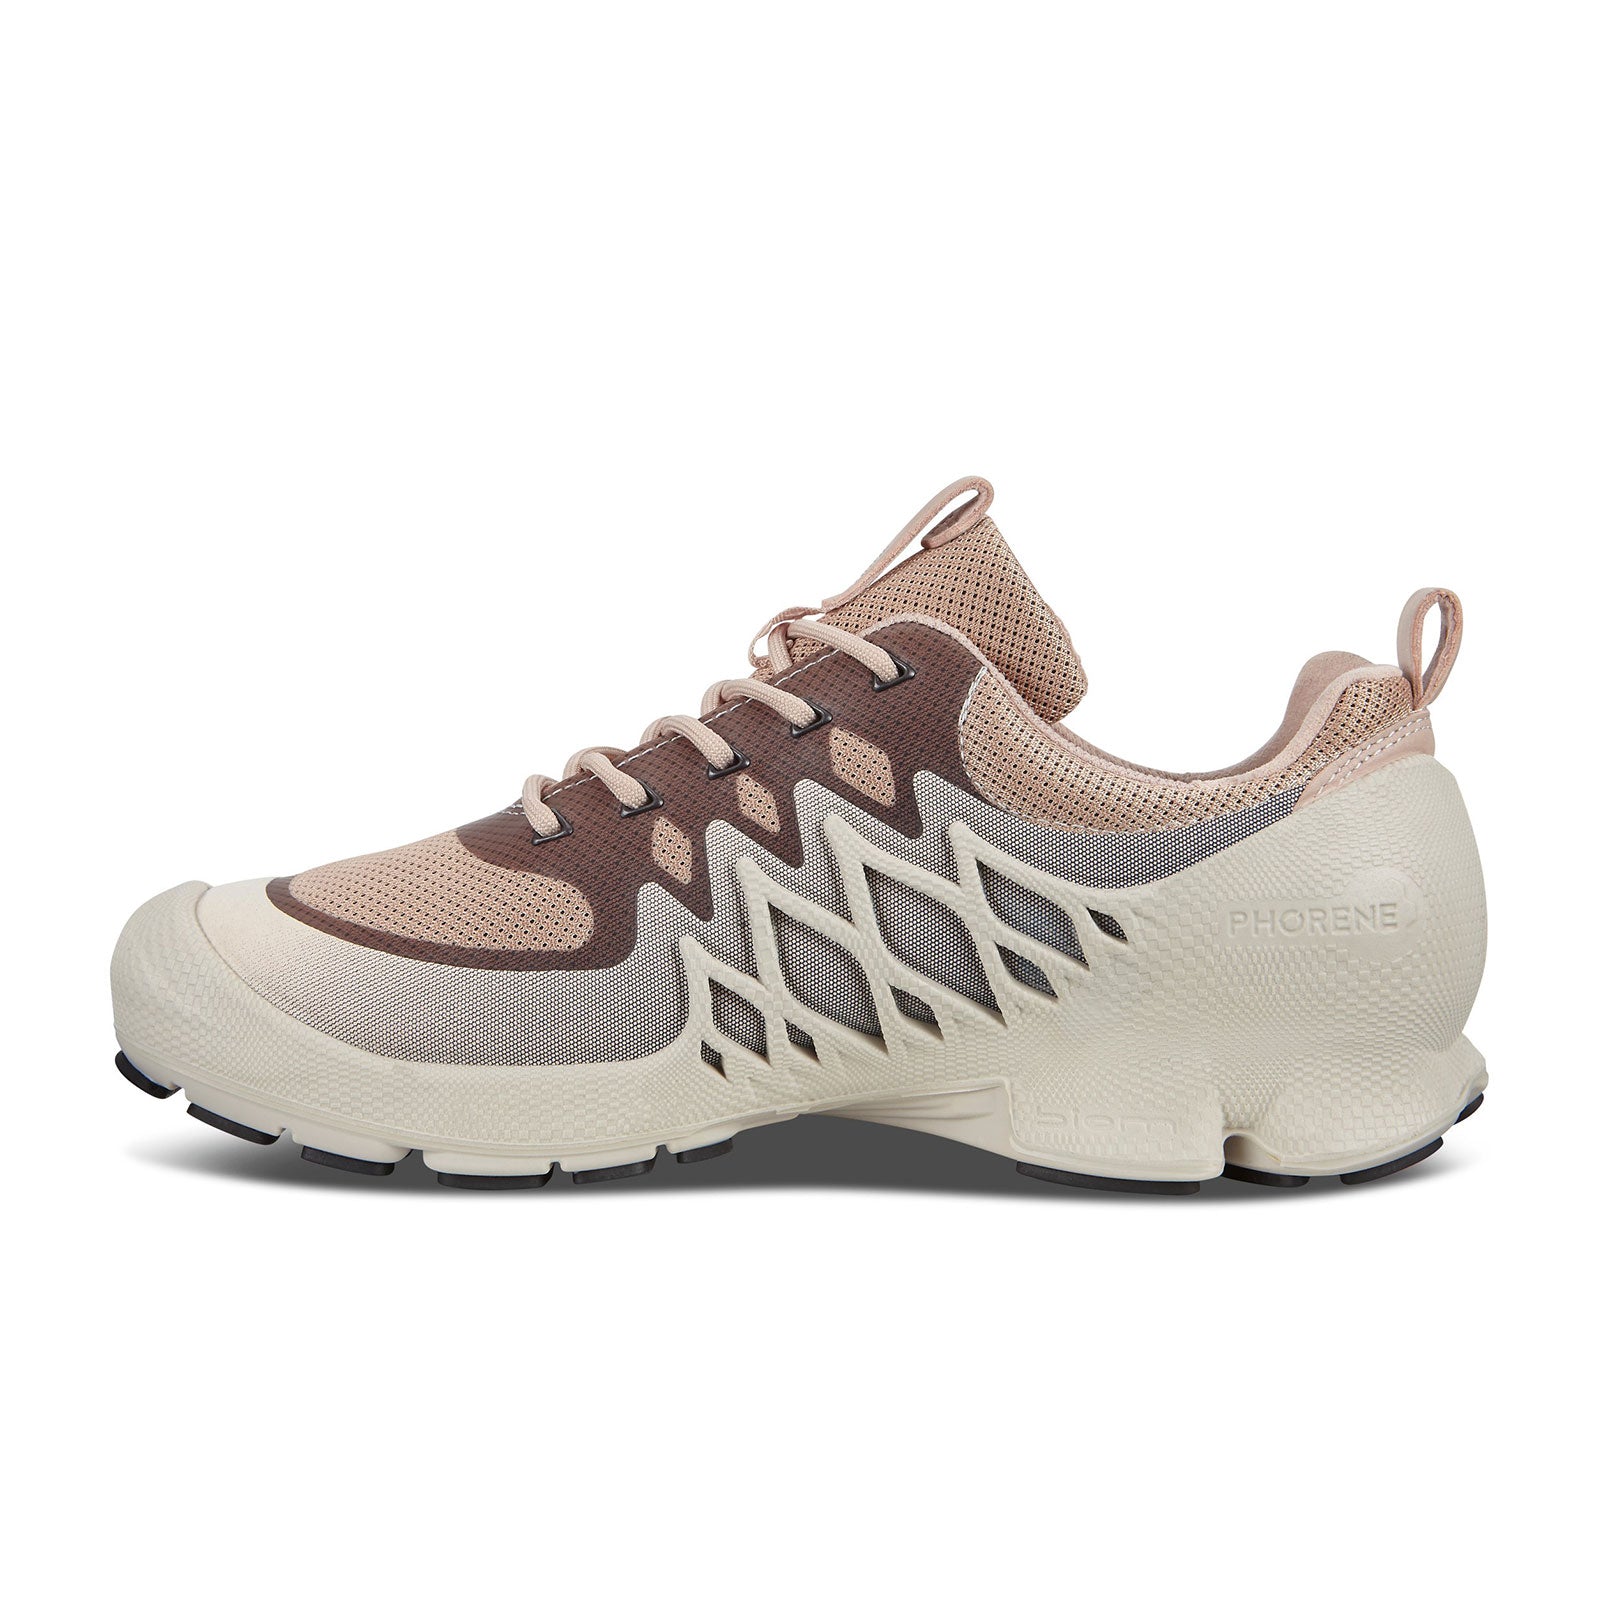 Ecco Biom AEX Trainer Low - Rose Dust/Marine - The Heel Shoe Fitters